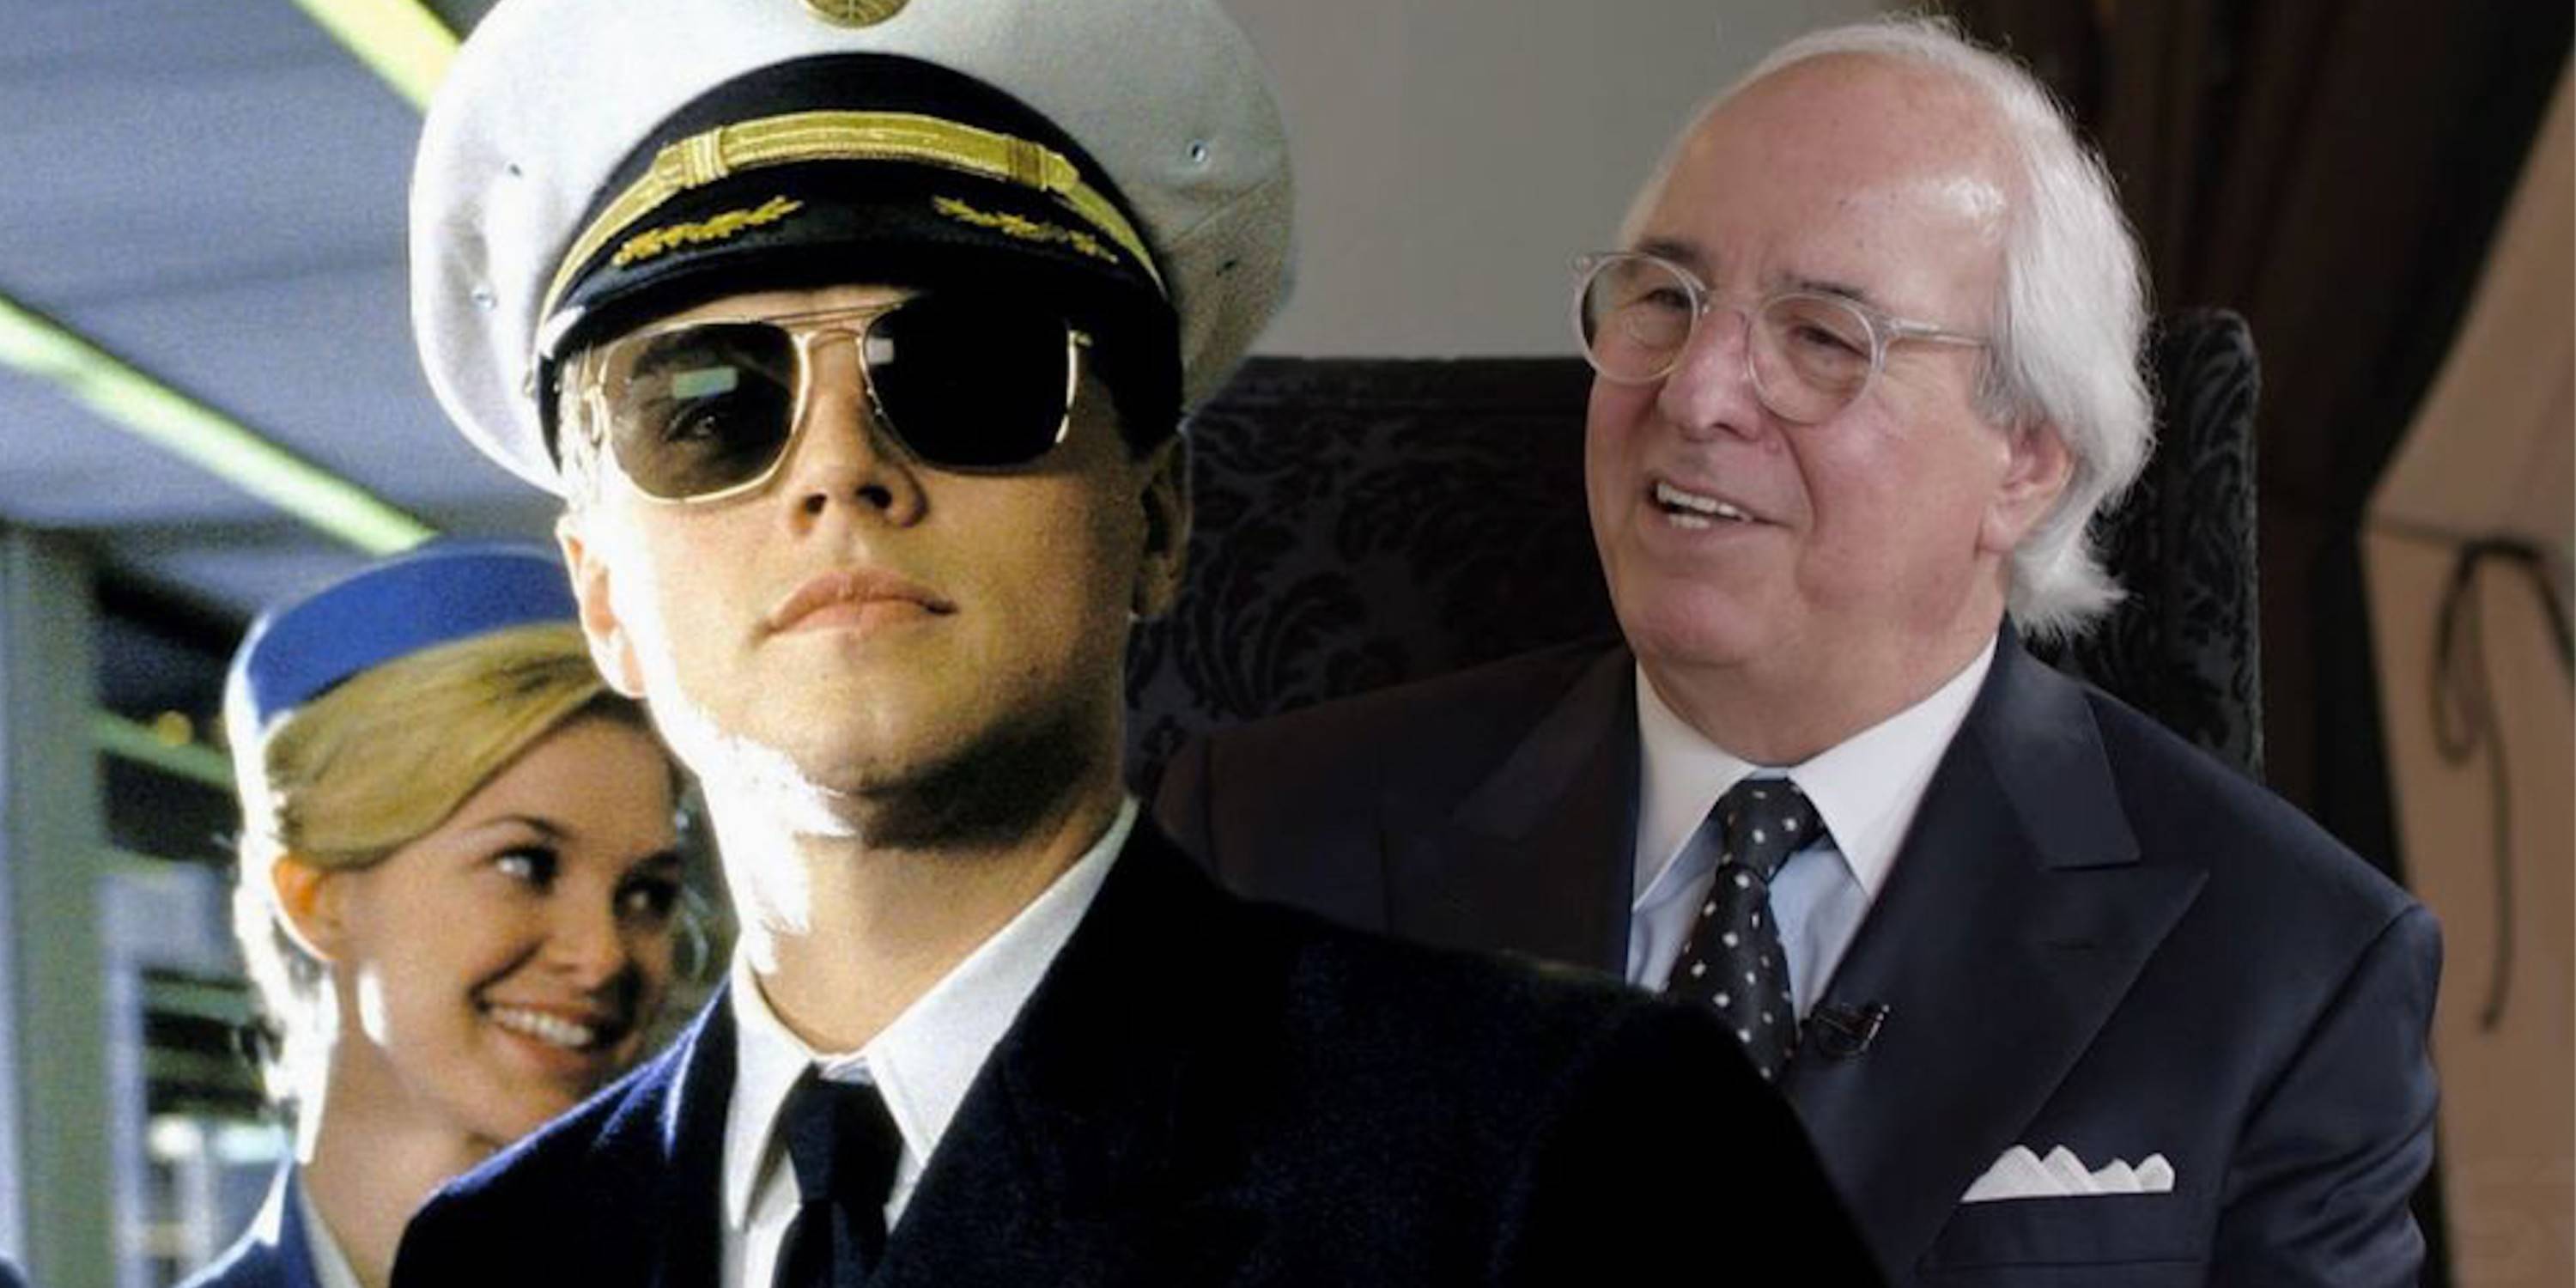  Leonardo DiCaprio : Frank Abagnale dans Catch Me If You Can